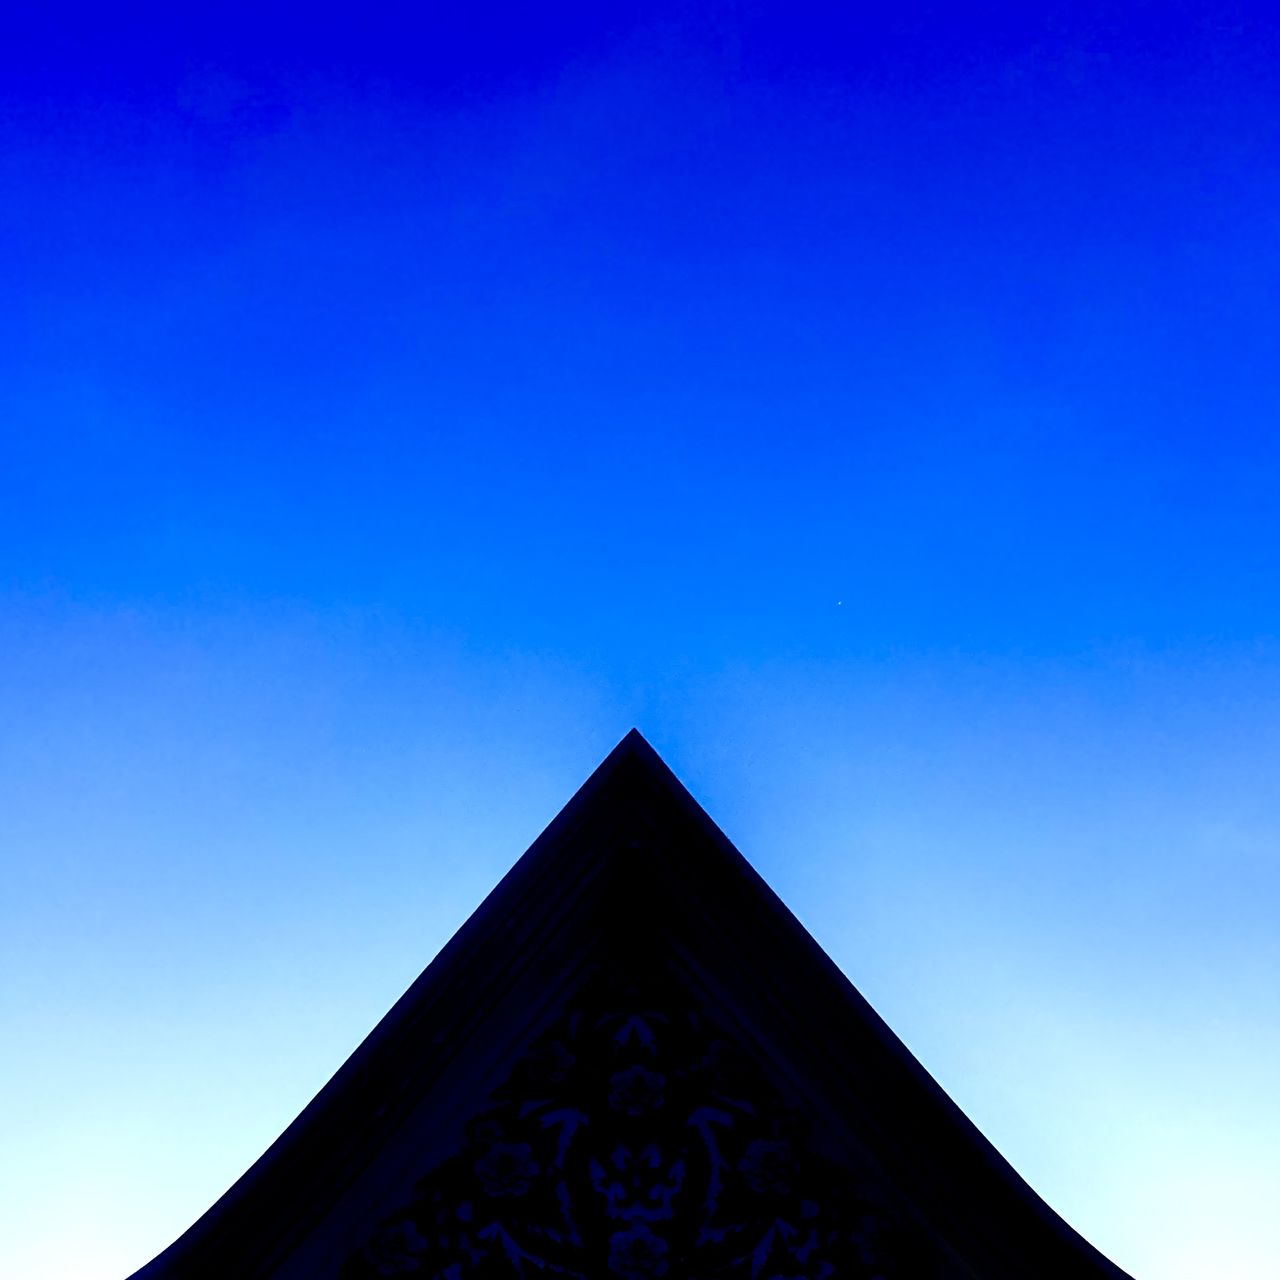 blue, sky, architecture, built structure, triangle shape, no people, horizon, building exterior, low angle view, nature, clear sky, light, sunlight, shape, copy space, dusk, building, travel destinations, history, reflection, outdoors, the past, evening, religion, day